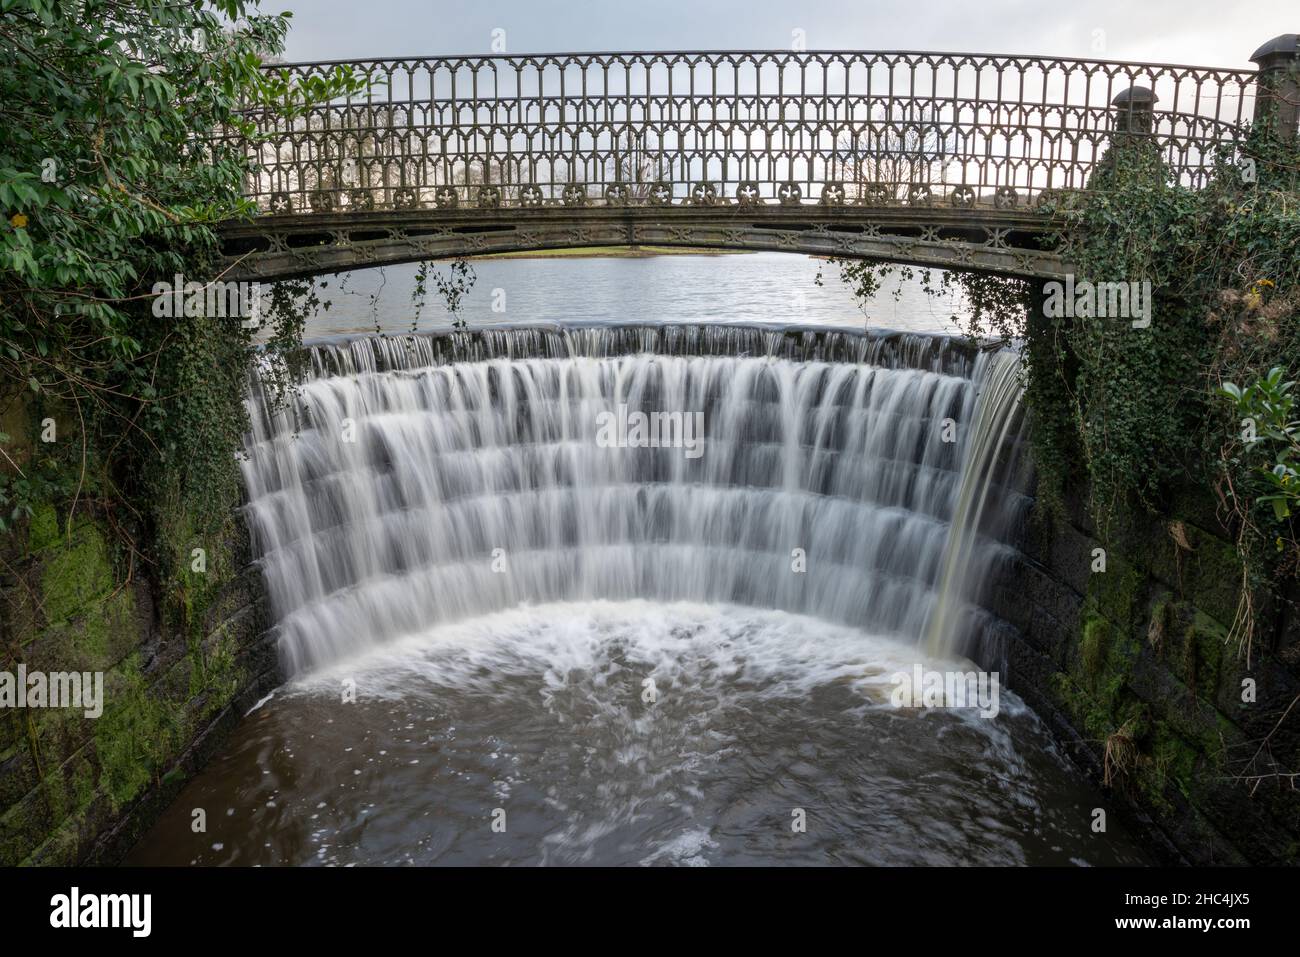 The Weir in Ripley Beck at Ripley Castle North Yorkshire England, United Kingdom Stock Photo